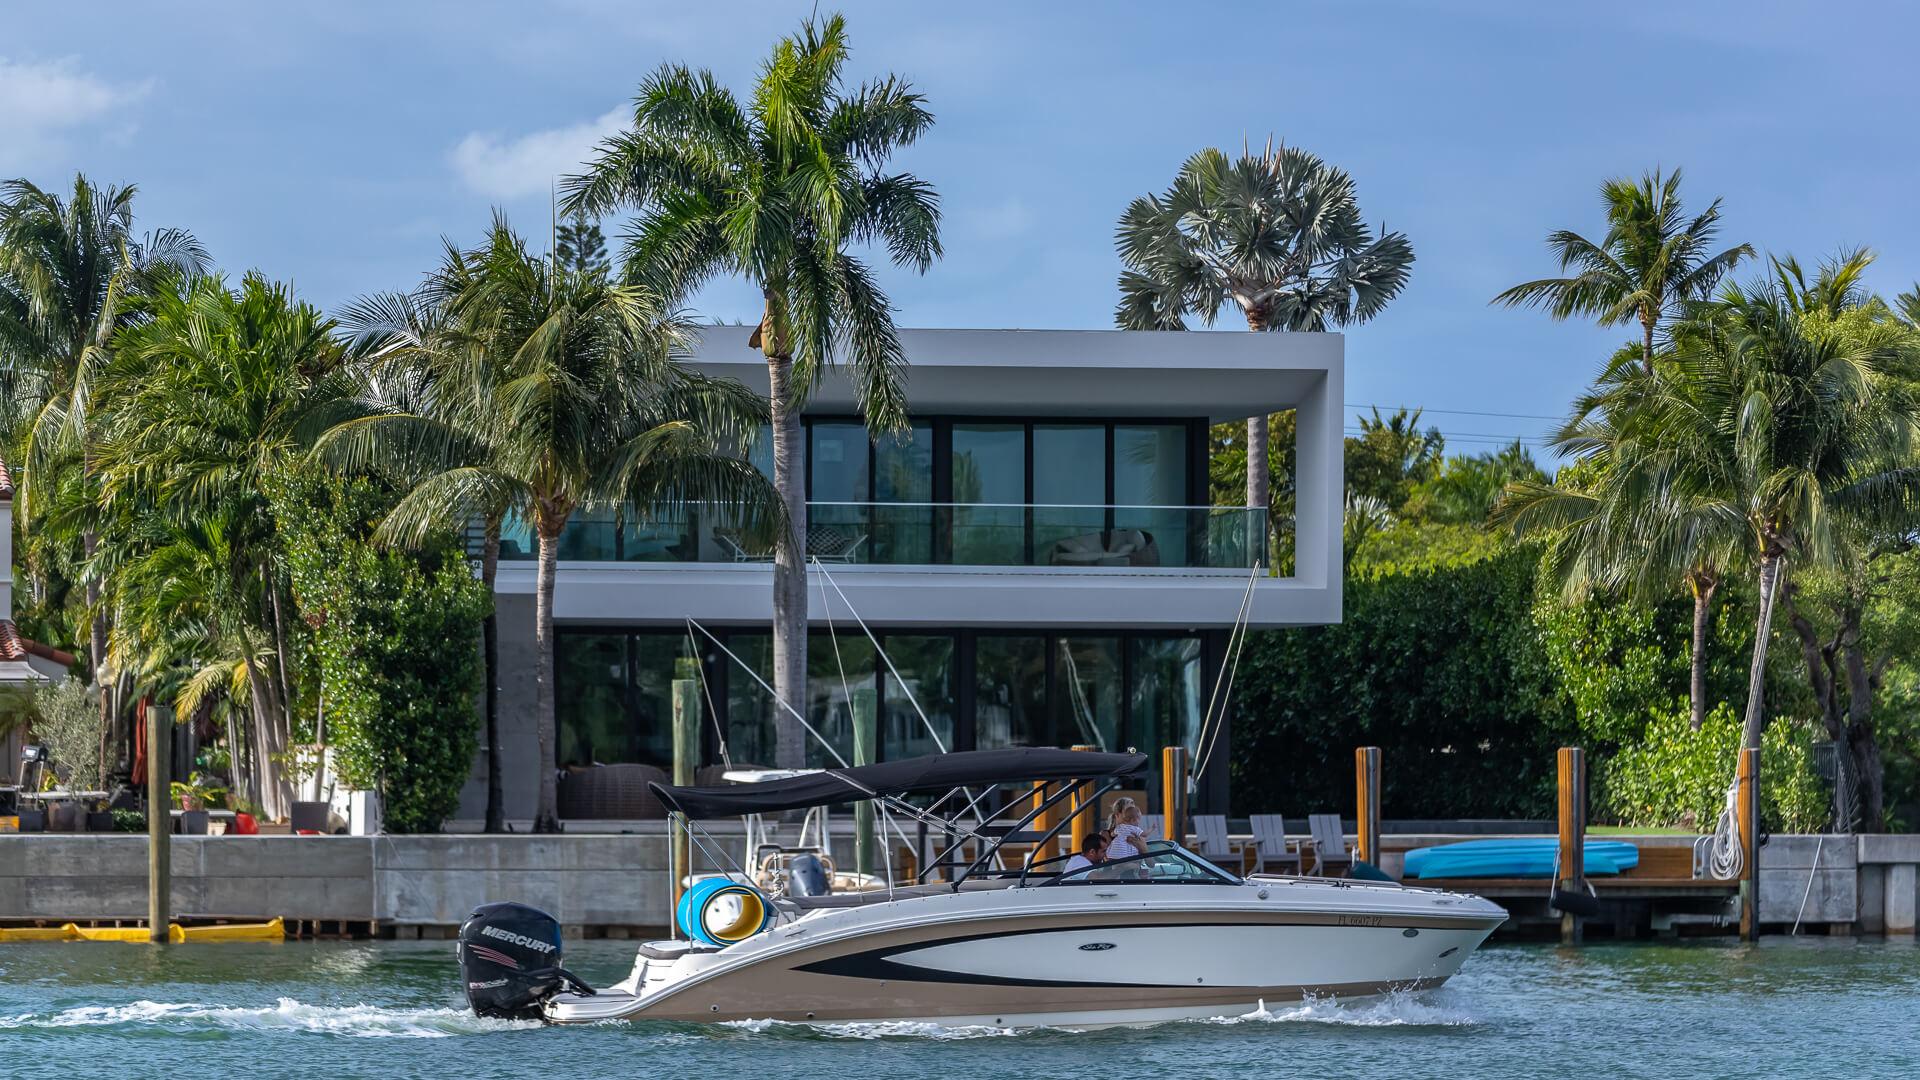 Learn on Miami Celebrity Home Tour by Boat